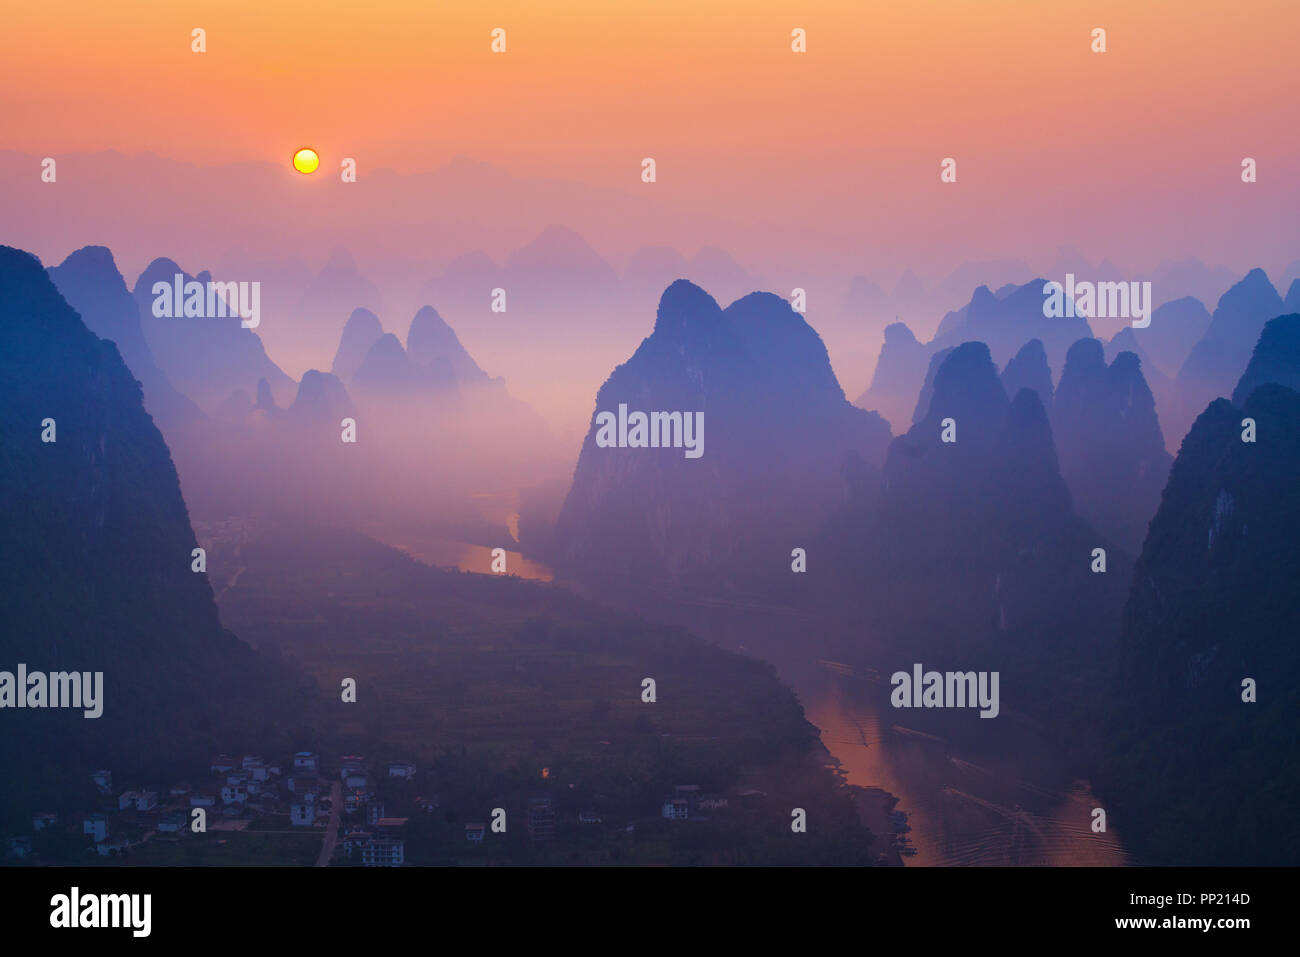 Sunrise Landscape of Guilin , Li River and Karst mountains called Xingping    mount, Guangxi Province, China Stock Photo